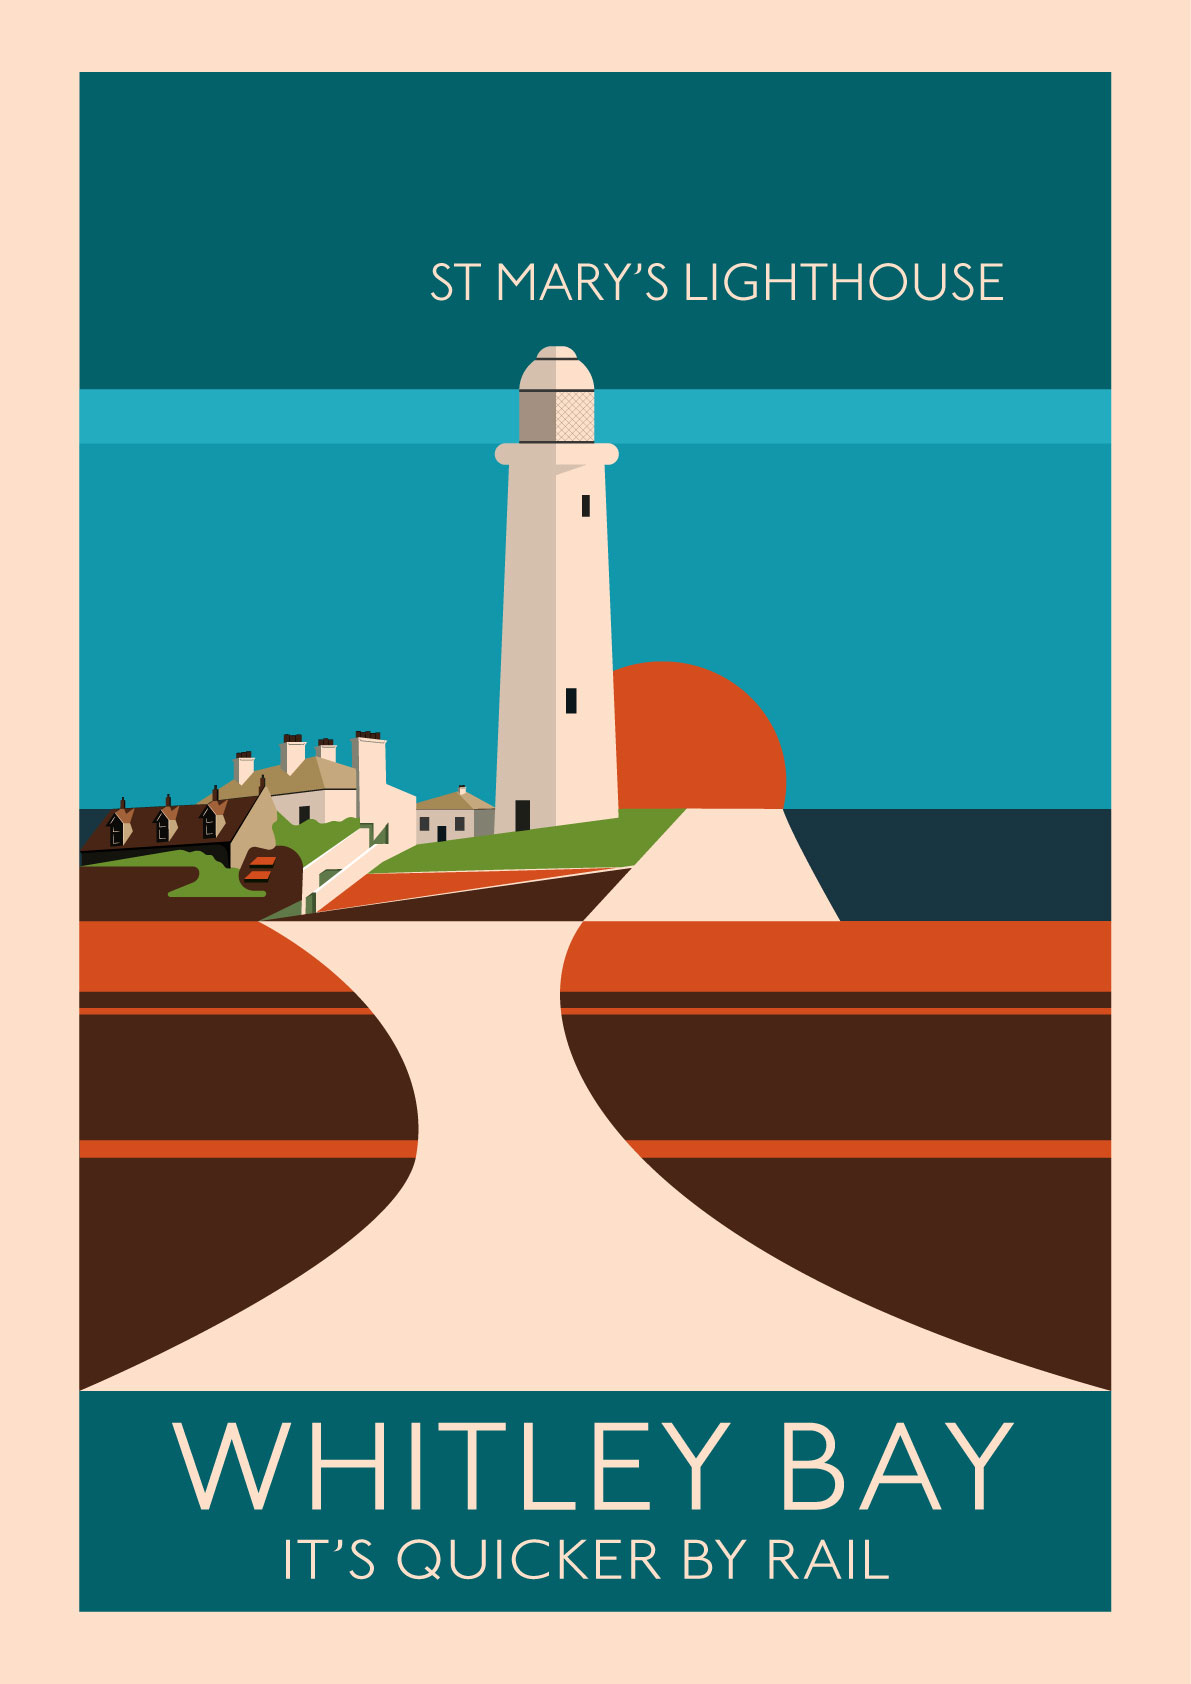 St Marys Lighthouse Whitley Bay Poster